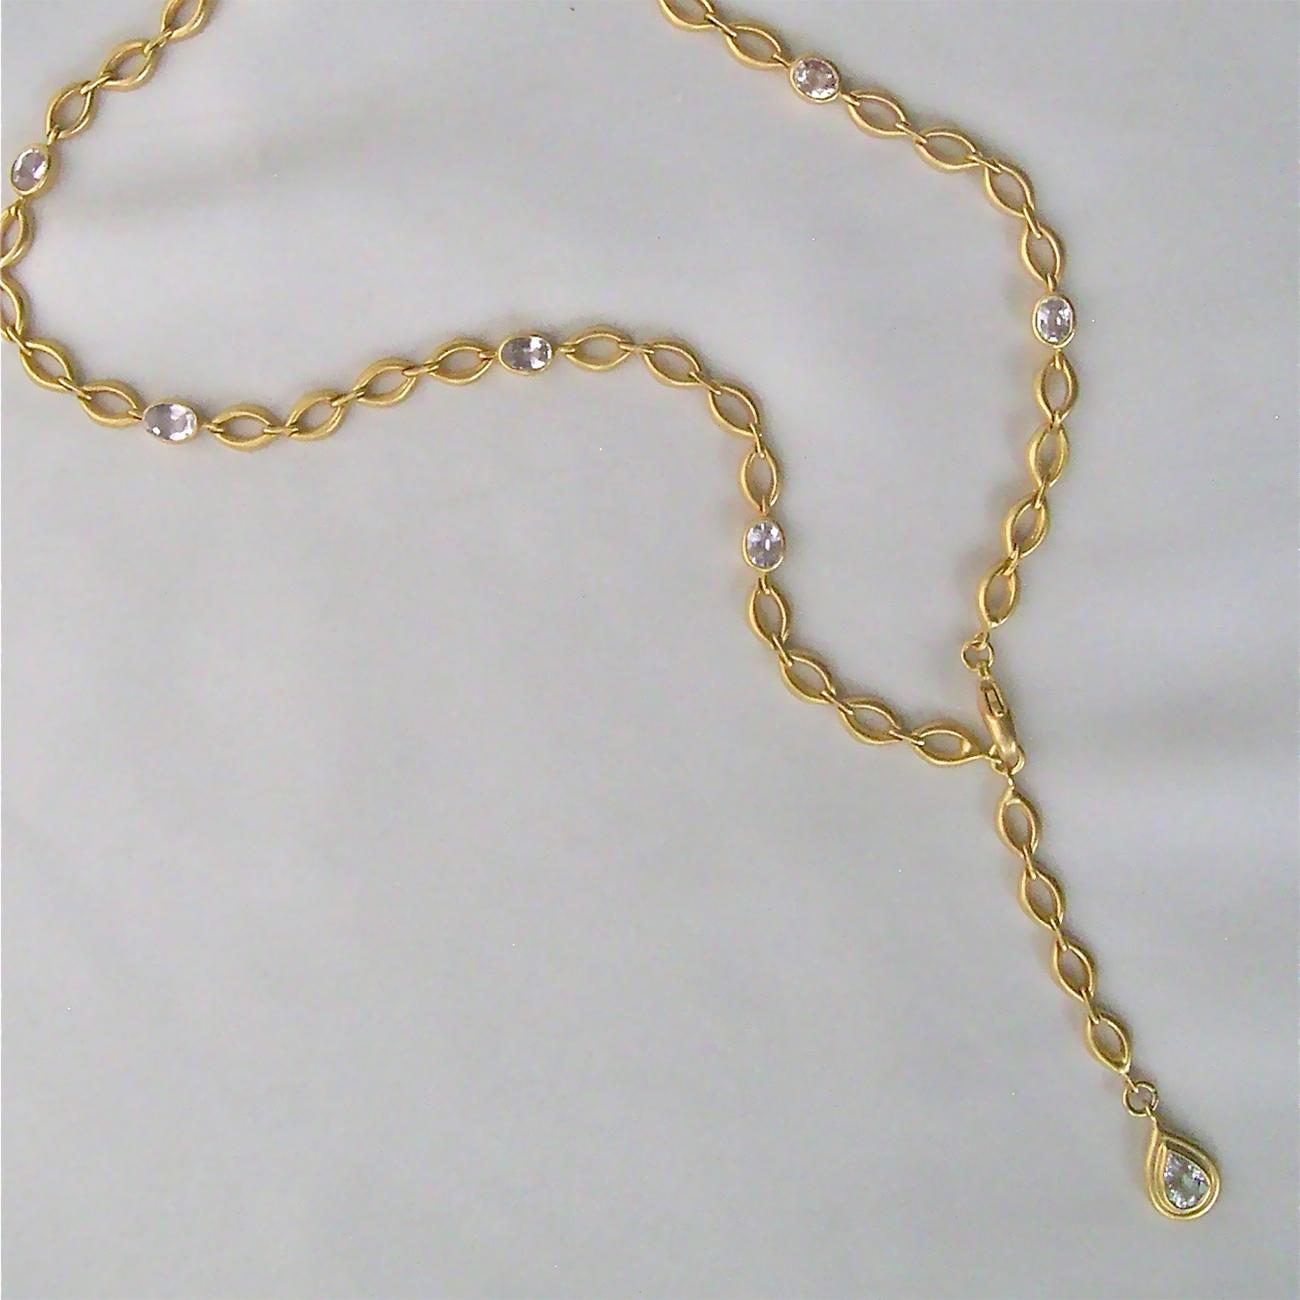 necklace with chain down back